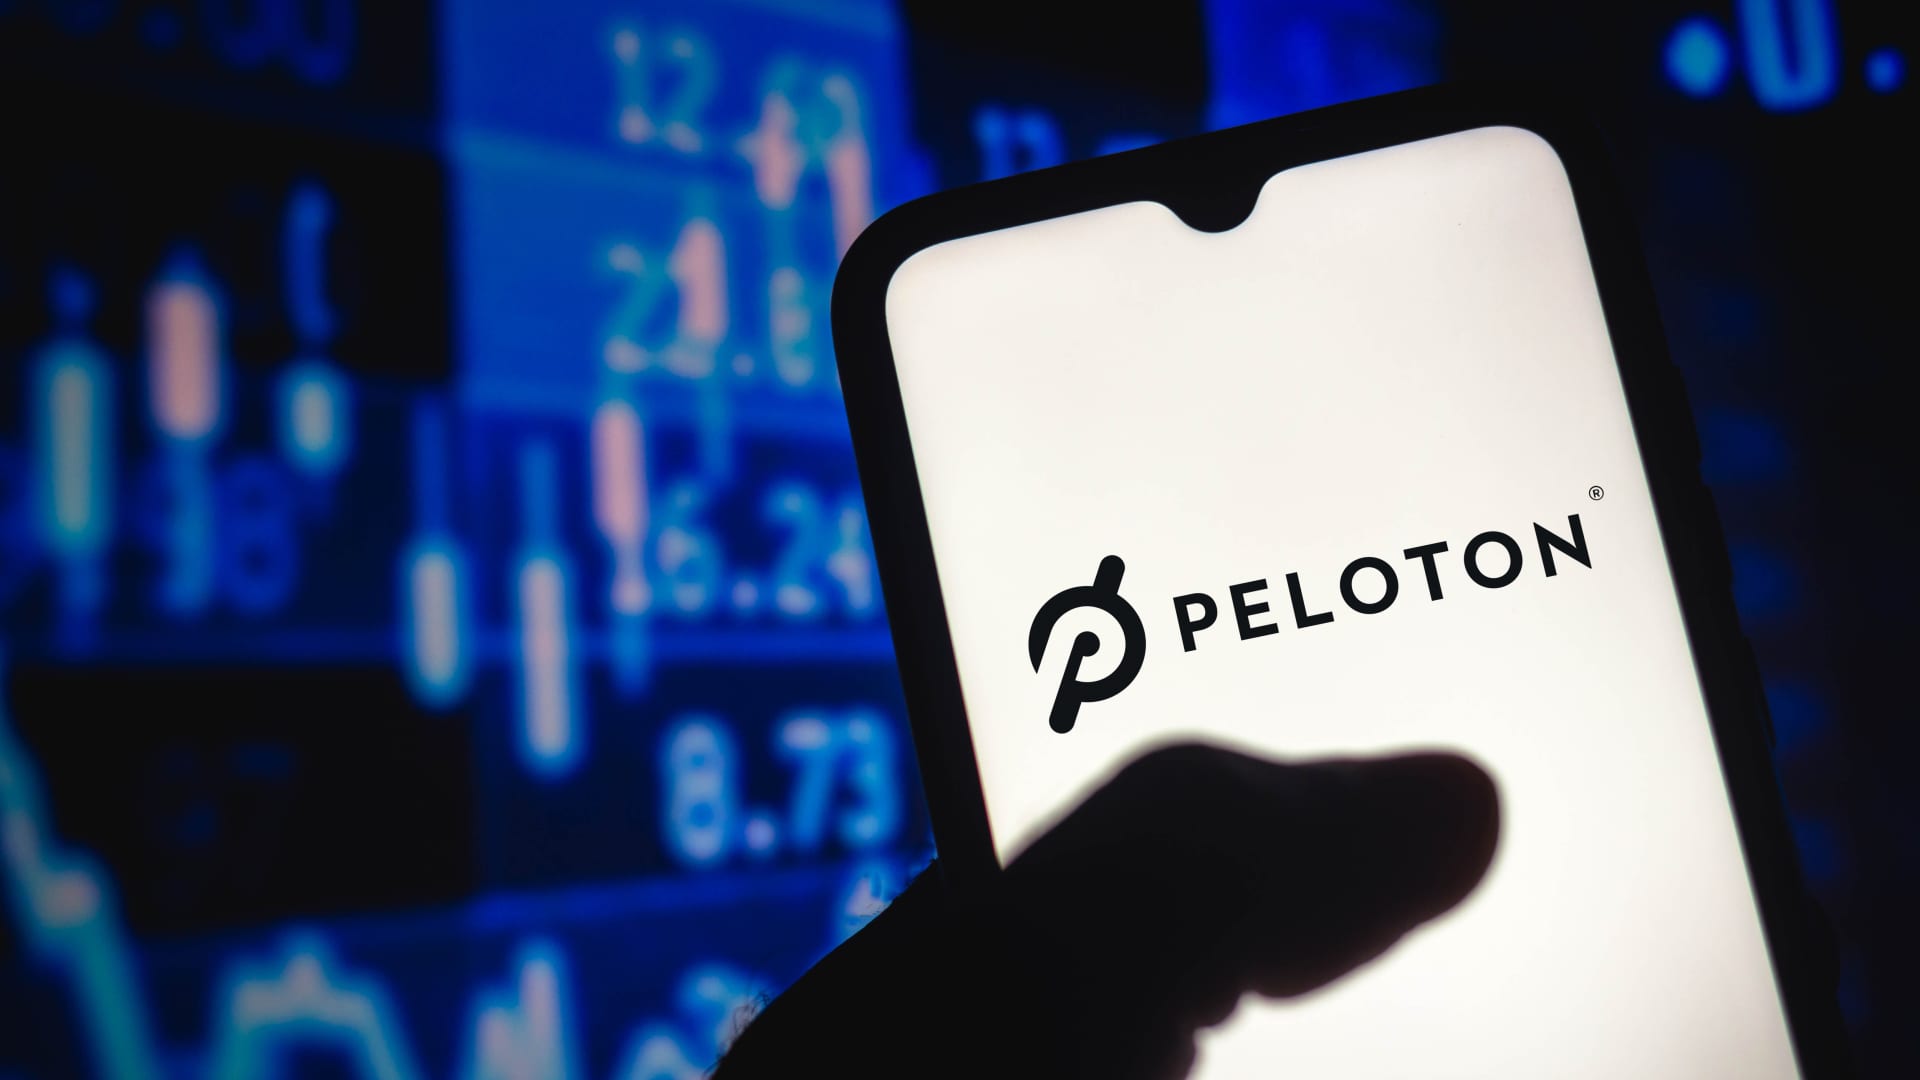 Buying Peloton and similar growth stocks is 'absolute nonsense,' says strategist